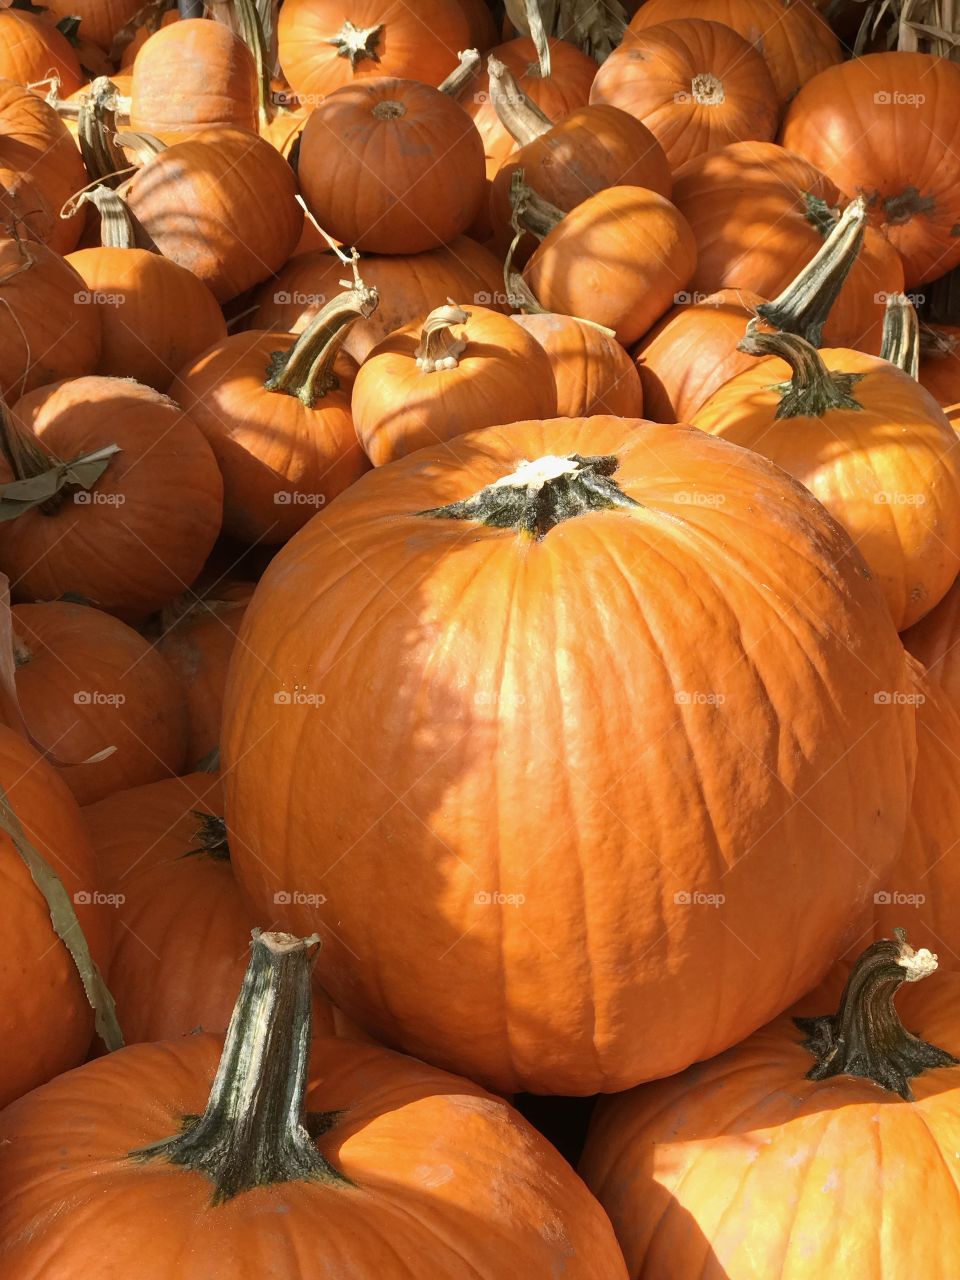 Piles of freshly harvested pumpkins ready to be taken home for holiday pies, breads, and scary jack-o-lanterns. 